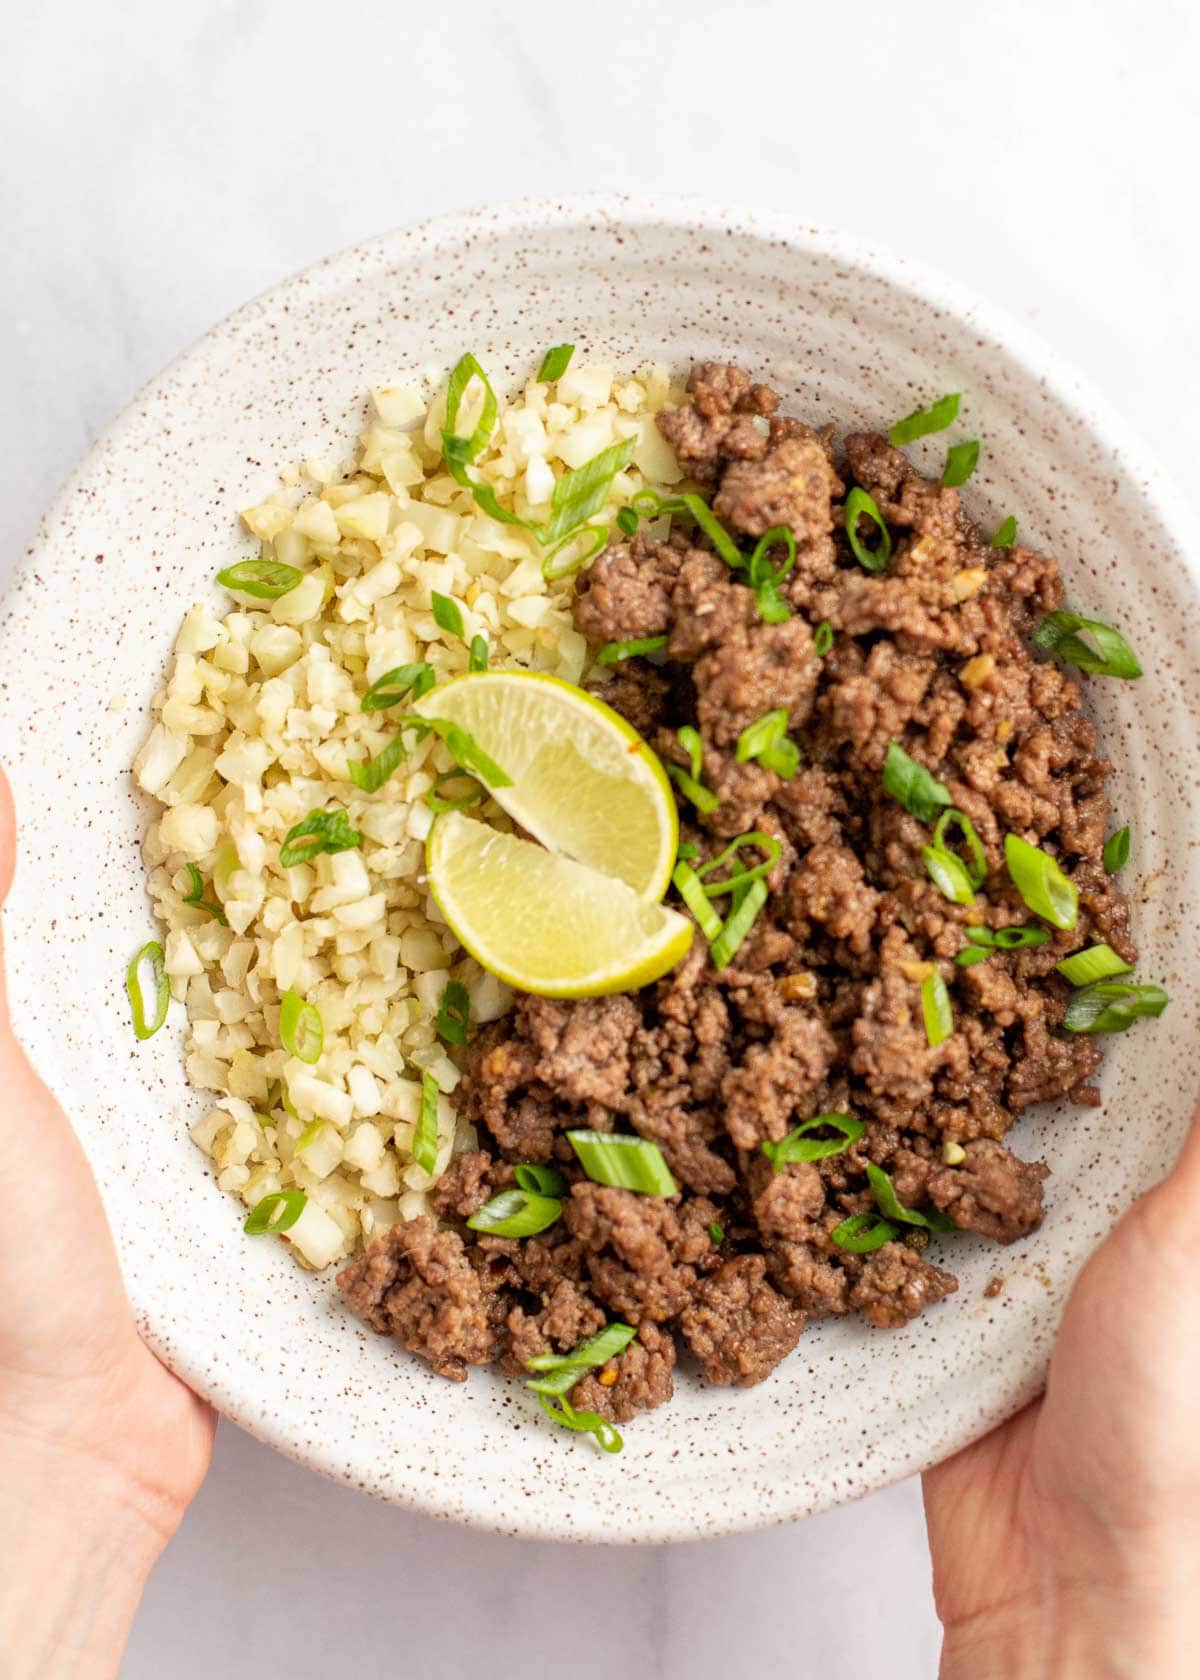 This Korean Beef is a one-pan dish that is ready in 25 minutes! Tender beef is cooked in a flavorful Korean-inspired sauce that pairs perfectly with cauliflower rice! You can enjoy a serving of this tasty dish for just 3 net carbs!